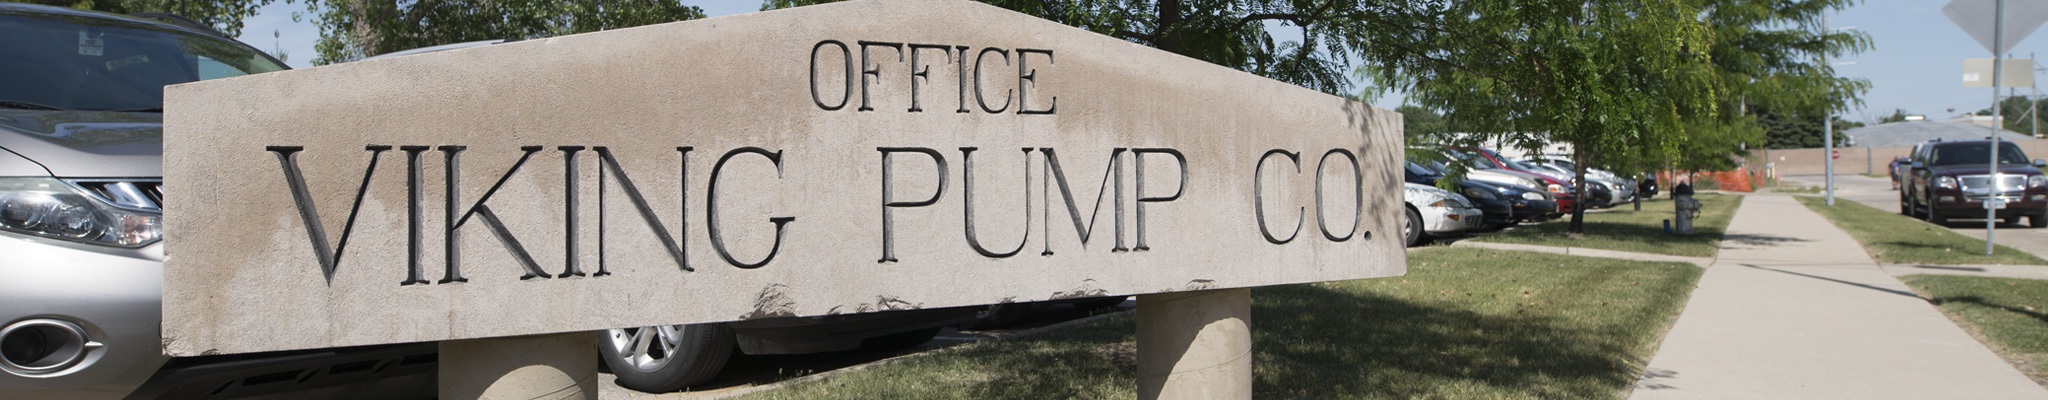 Viking pump sign outside office